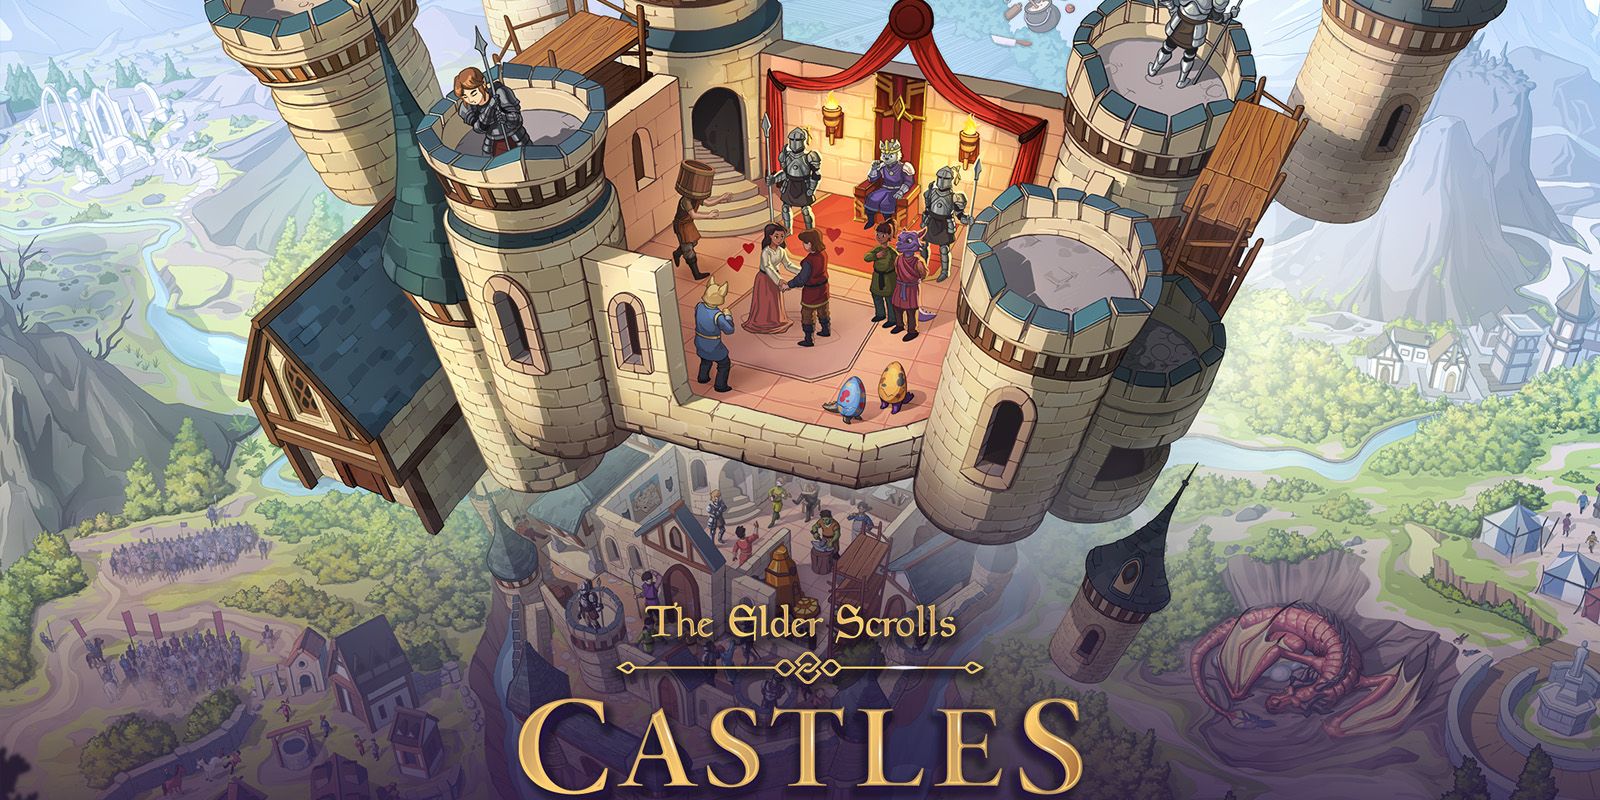 The Elder Scrolls Castles artwork showing a floating section of a castle and the title logo.